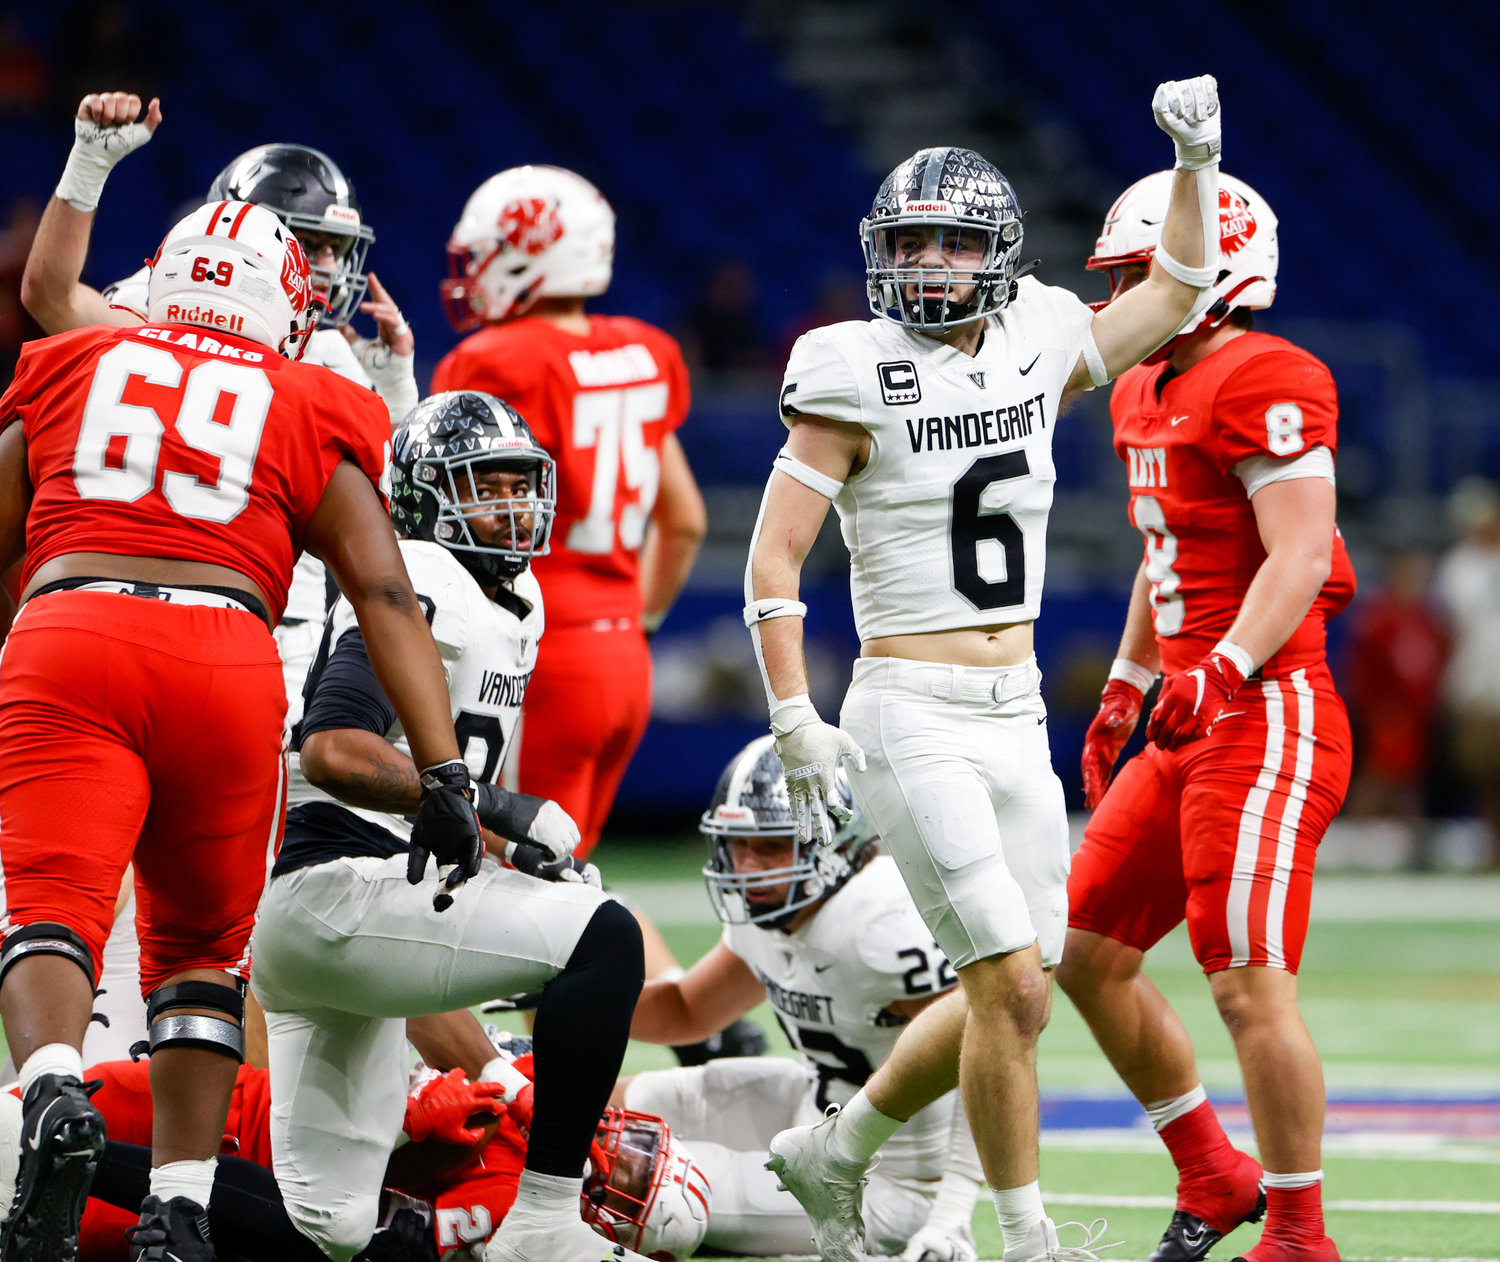 Vandegrift Vipers senior defensive back Andrew Scott (6) gestures fourth down after a defensive stop during the Class 6A-DII state semifinal football game between Katy and Vandegrift on Dec. 10, 2022 in San Antonio.